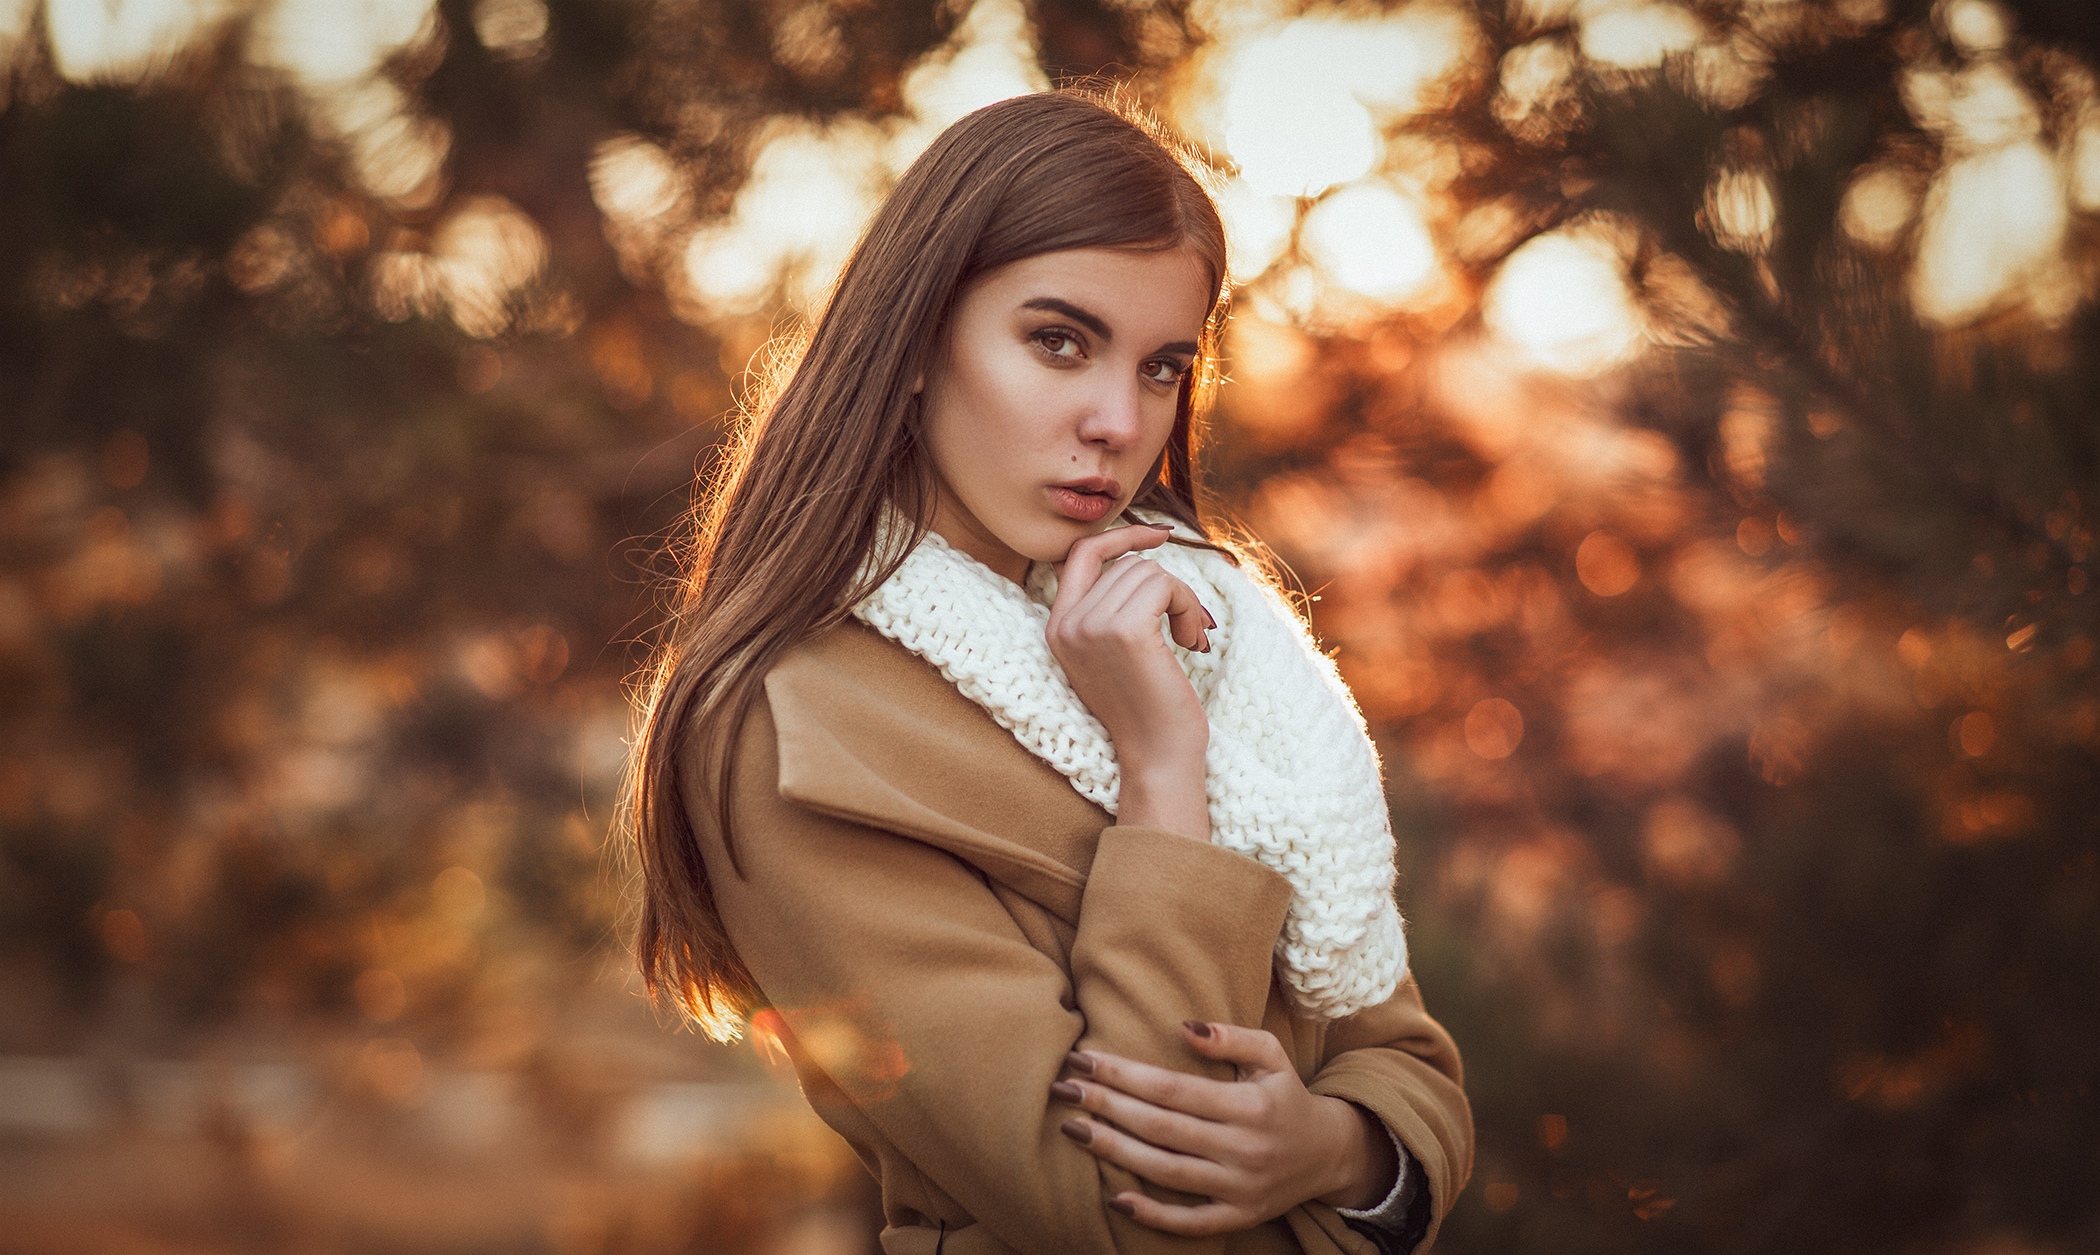 People 2100x1255 women model brunette long hair looking at viewer outdoors portrait scarf coats brown coat painted nails lens flare depth of field women outdoors straight hair brown eyes long nails touching face